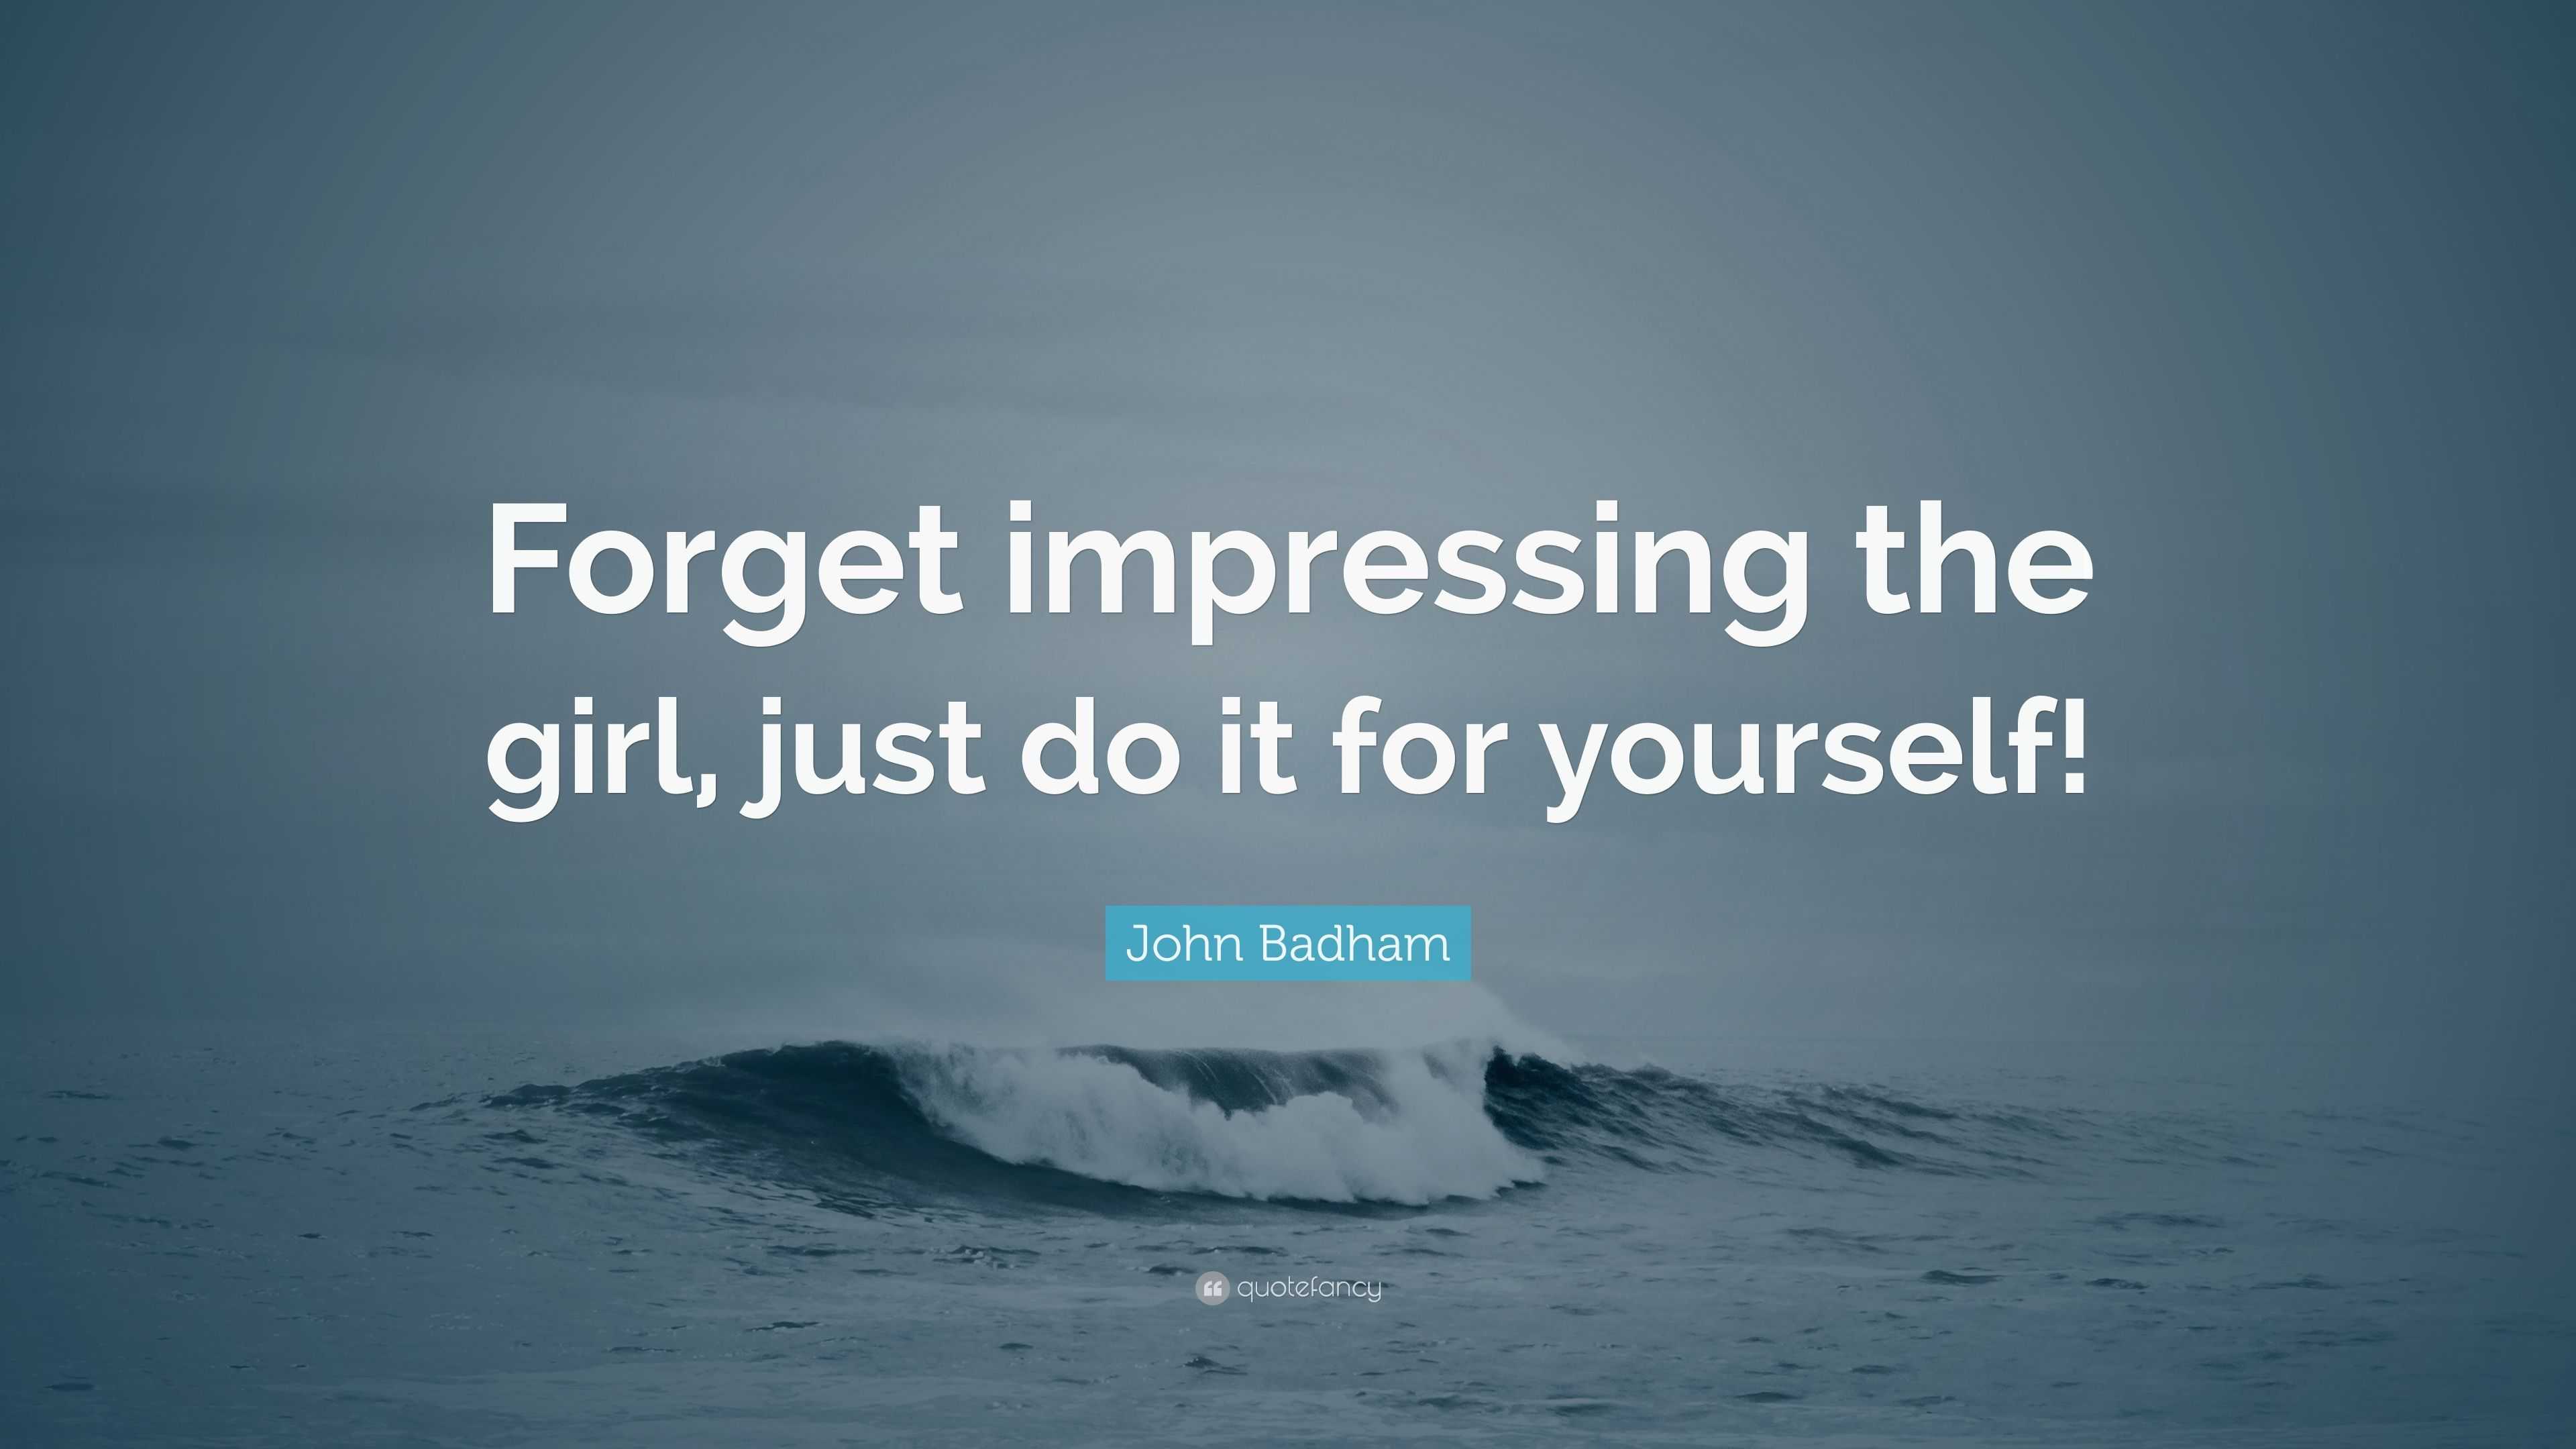 John Badham Quote “forget Impressing The Girl Just Do It For Yourself”